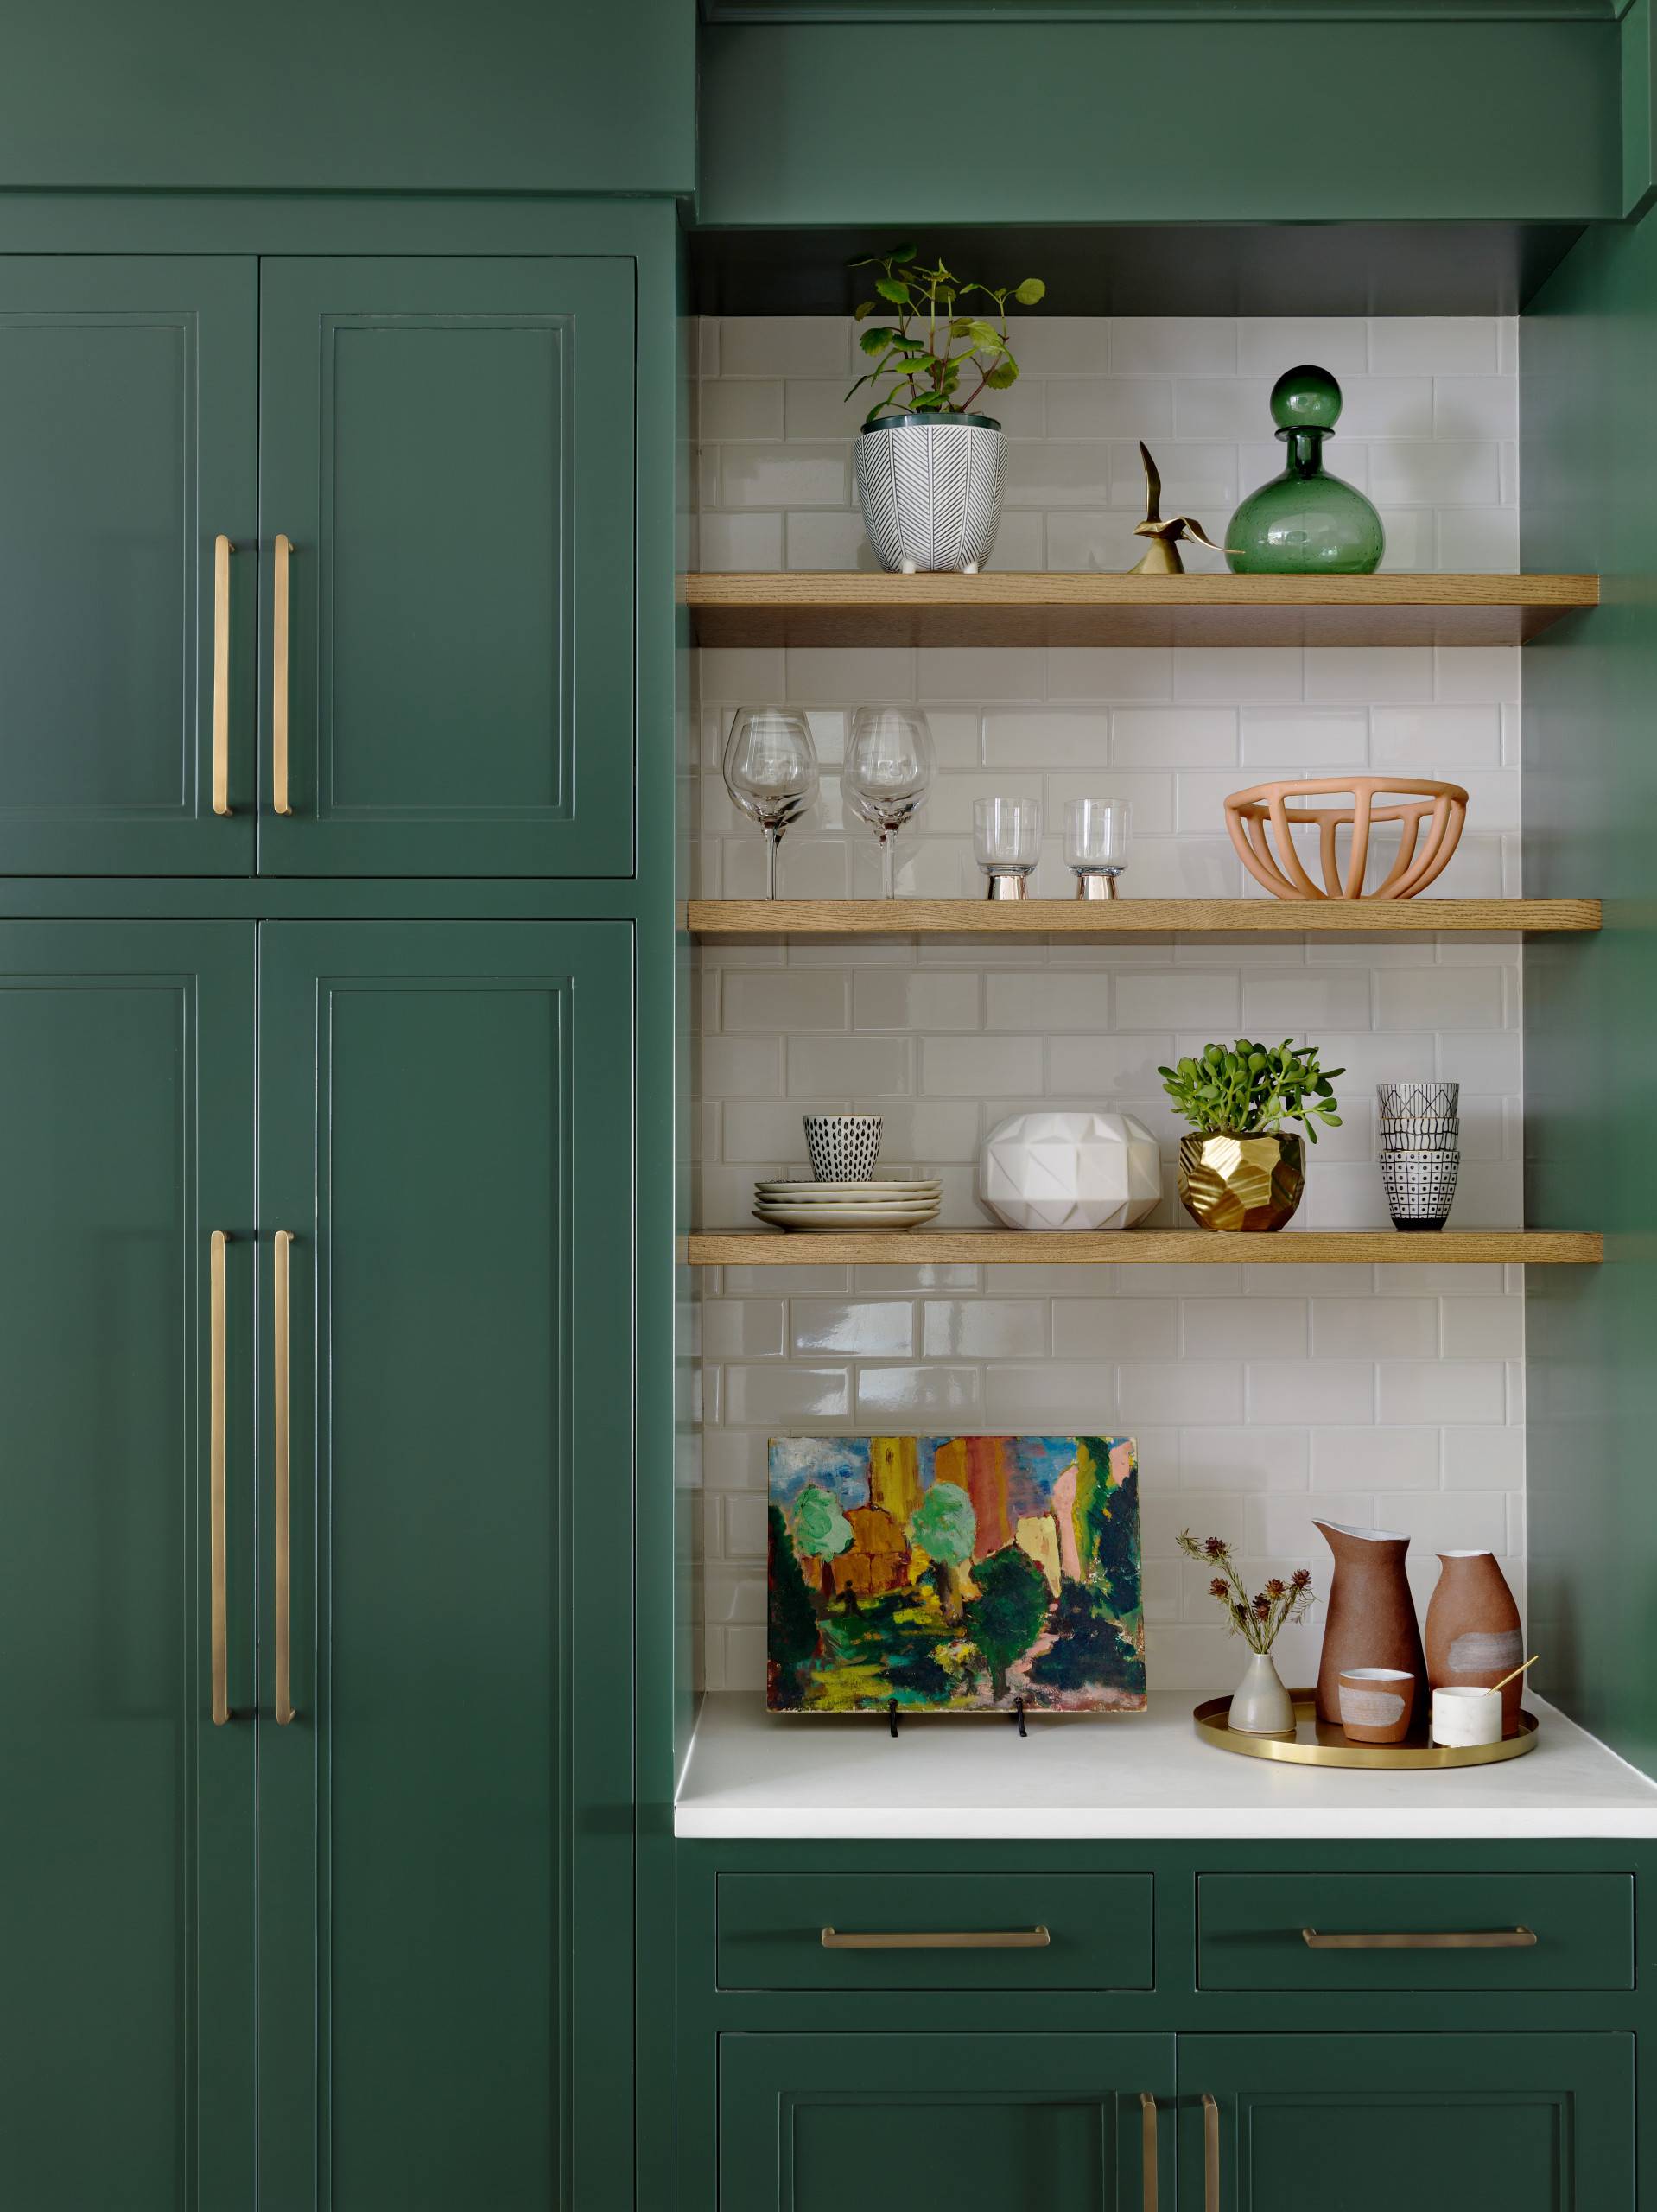 Jewel green tone cabinetry (from Houzz)